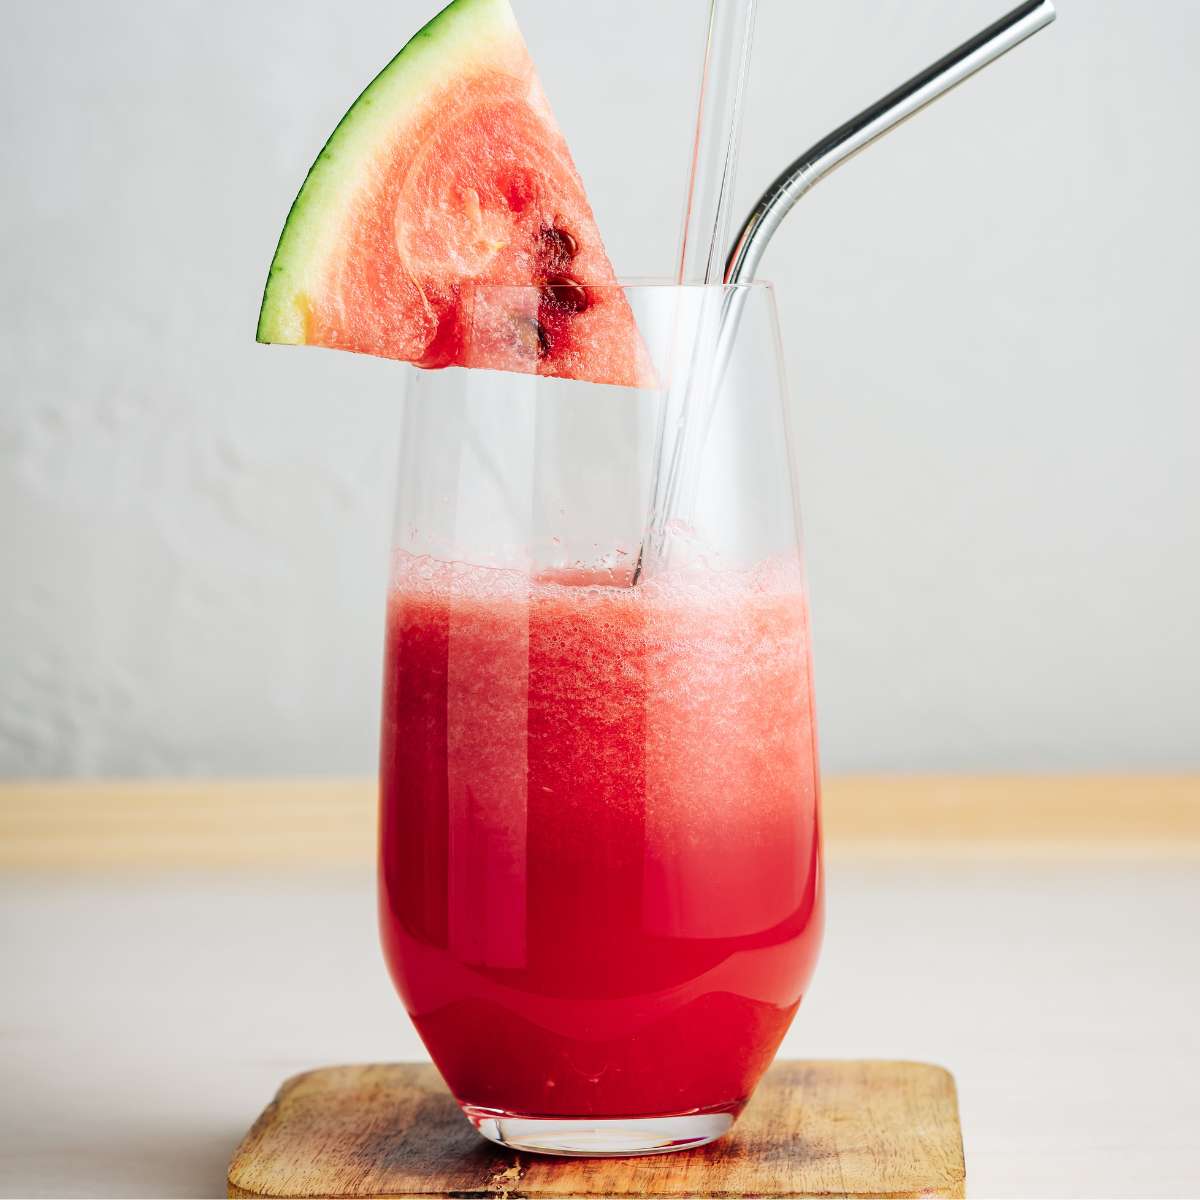 Watermelon juice topped with watermelon slice on table